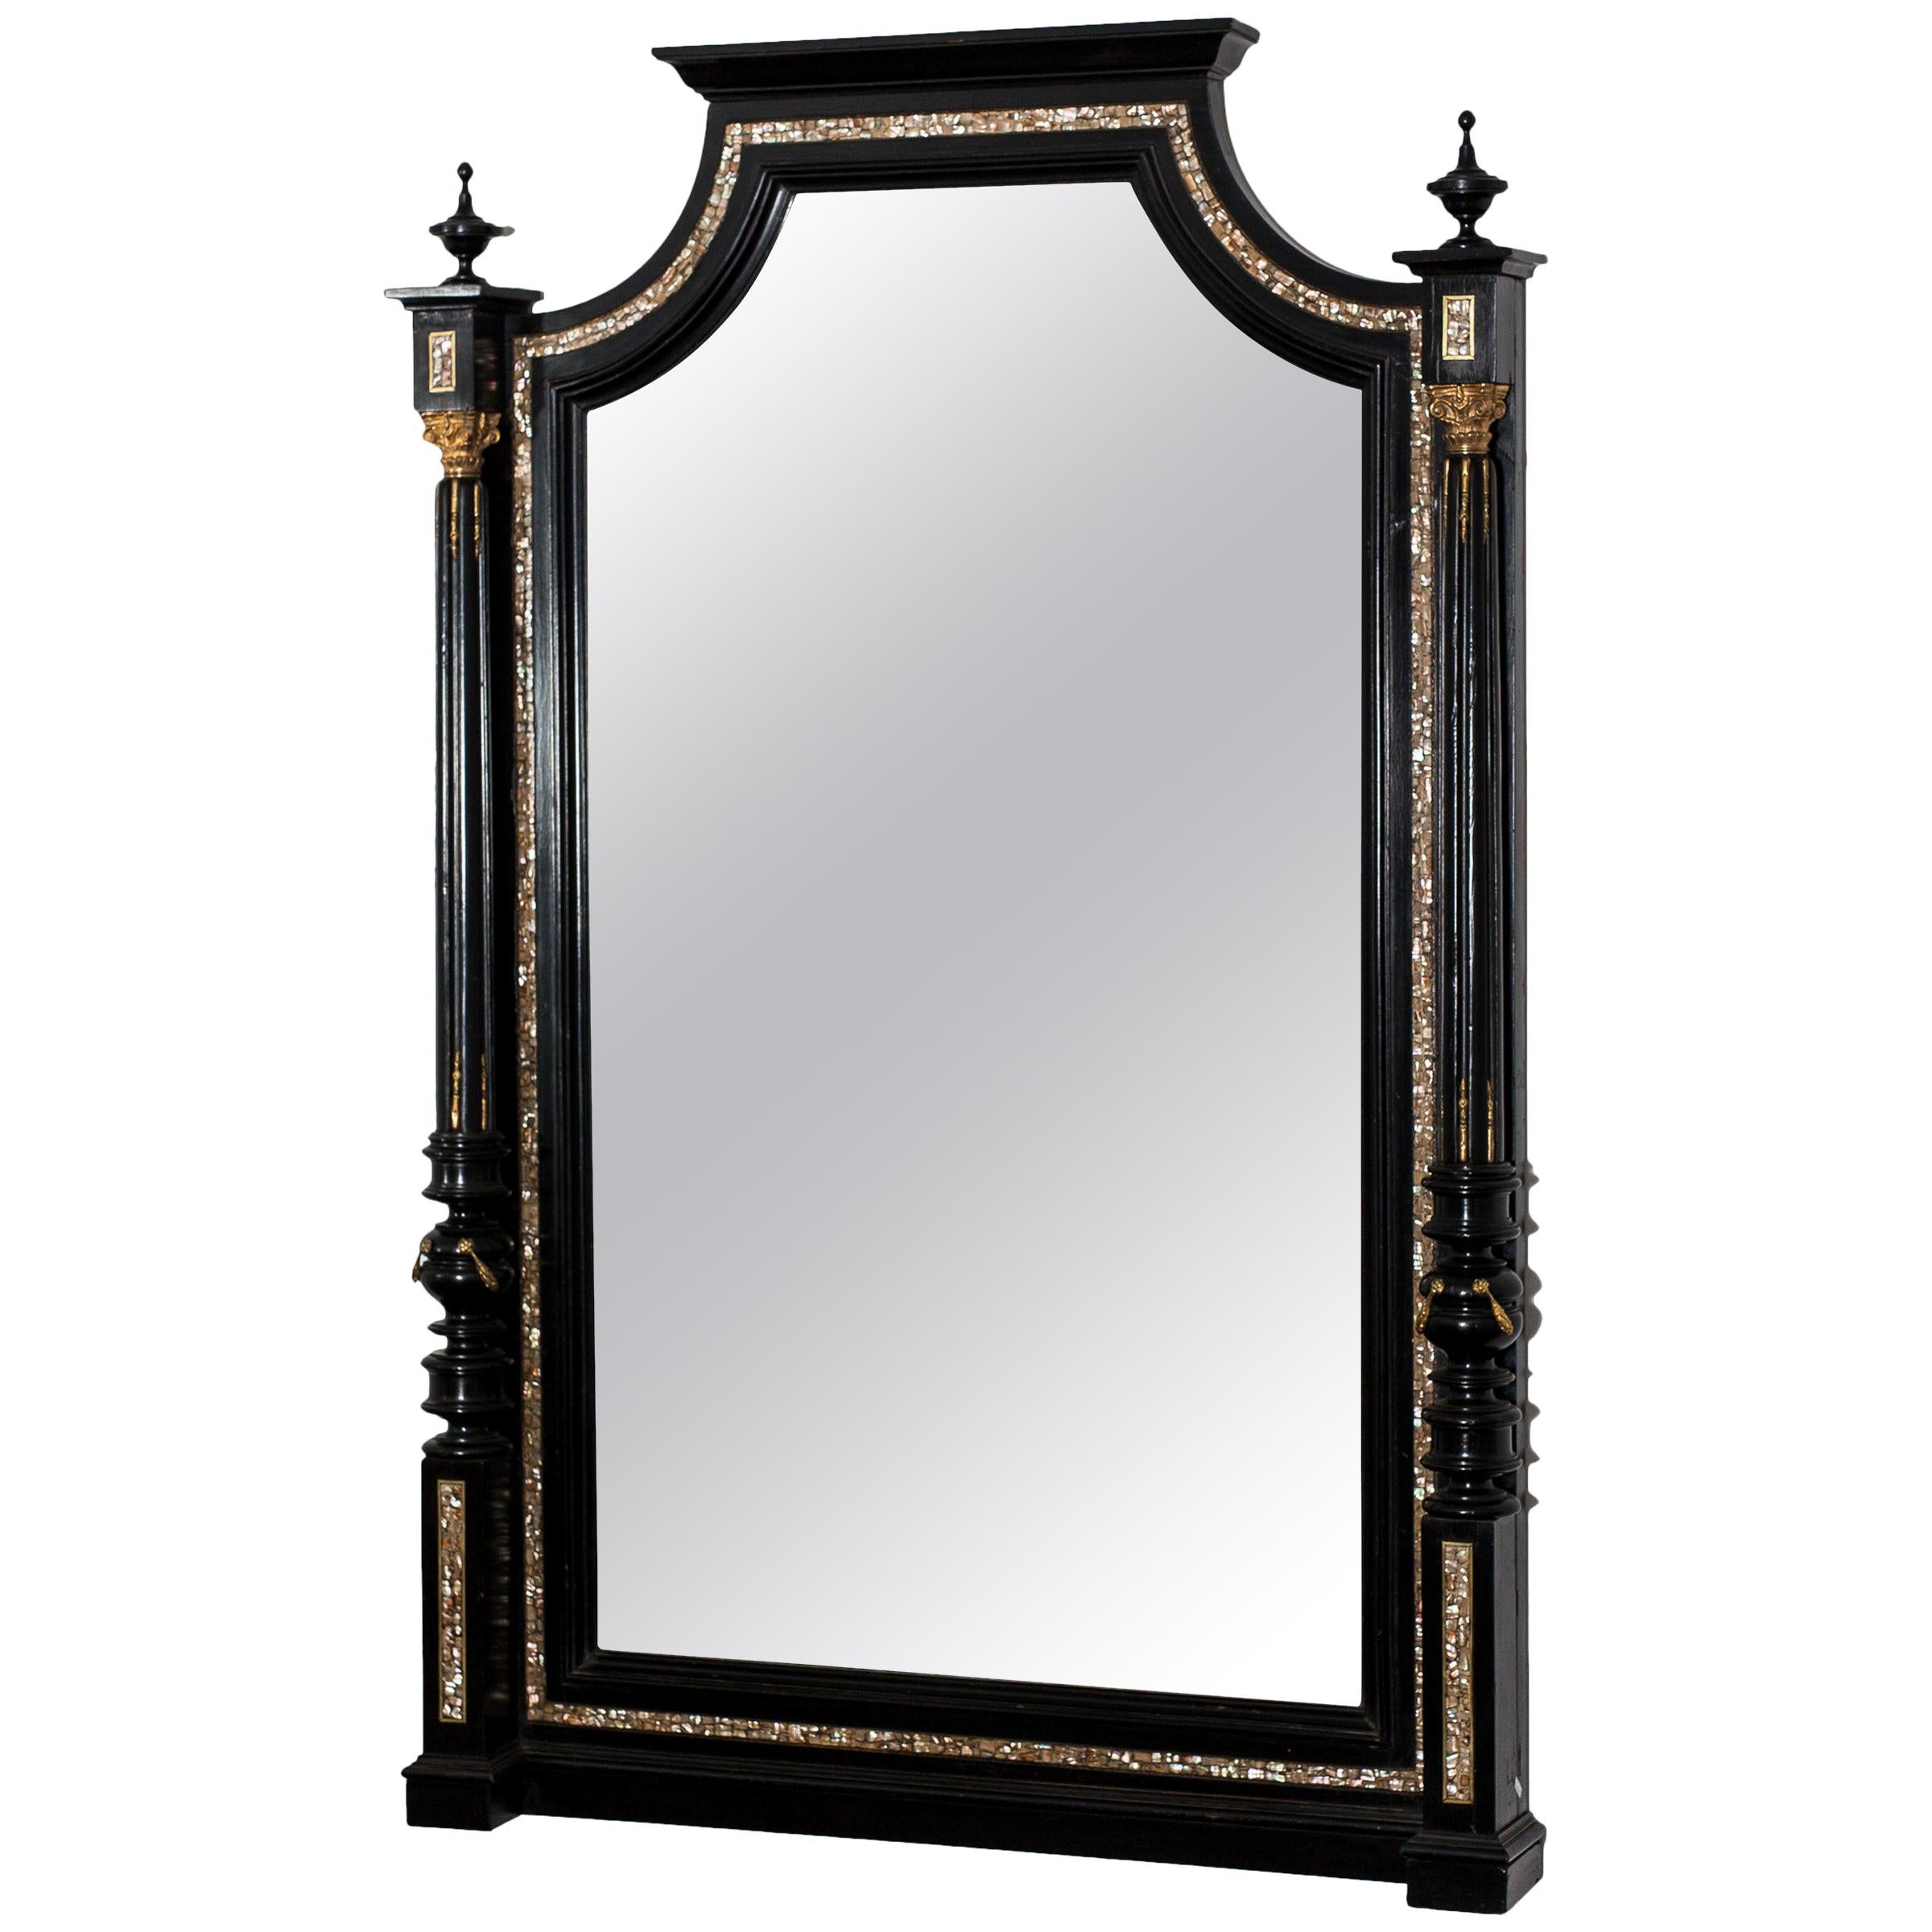 Black Makart Mirror with Mother of Pearl Inlays, Austria, circa 1880 For Sale